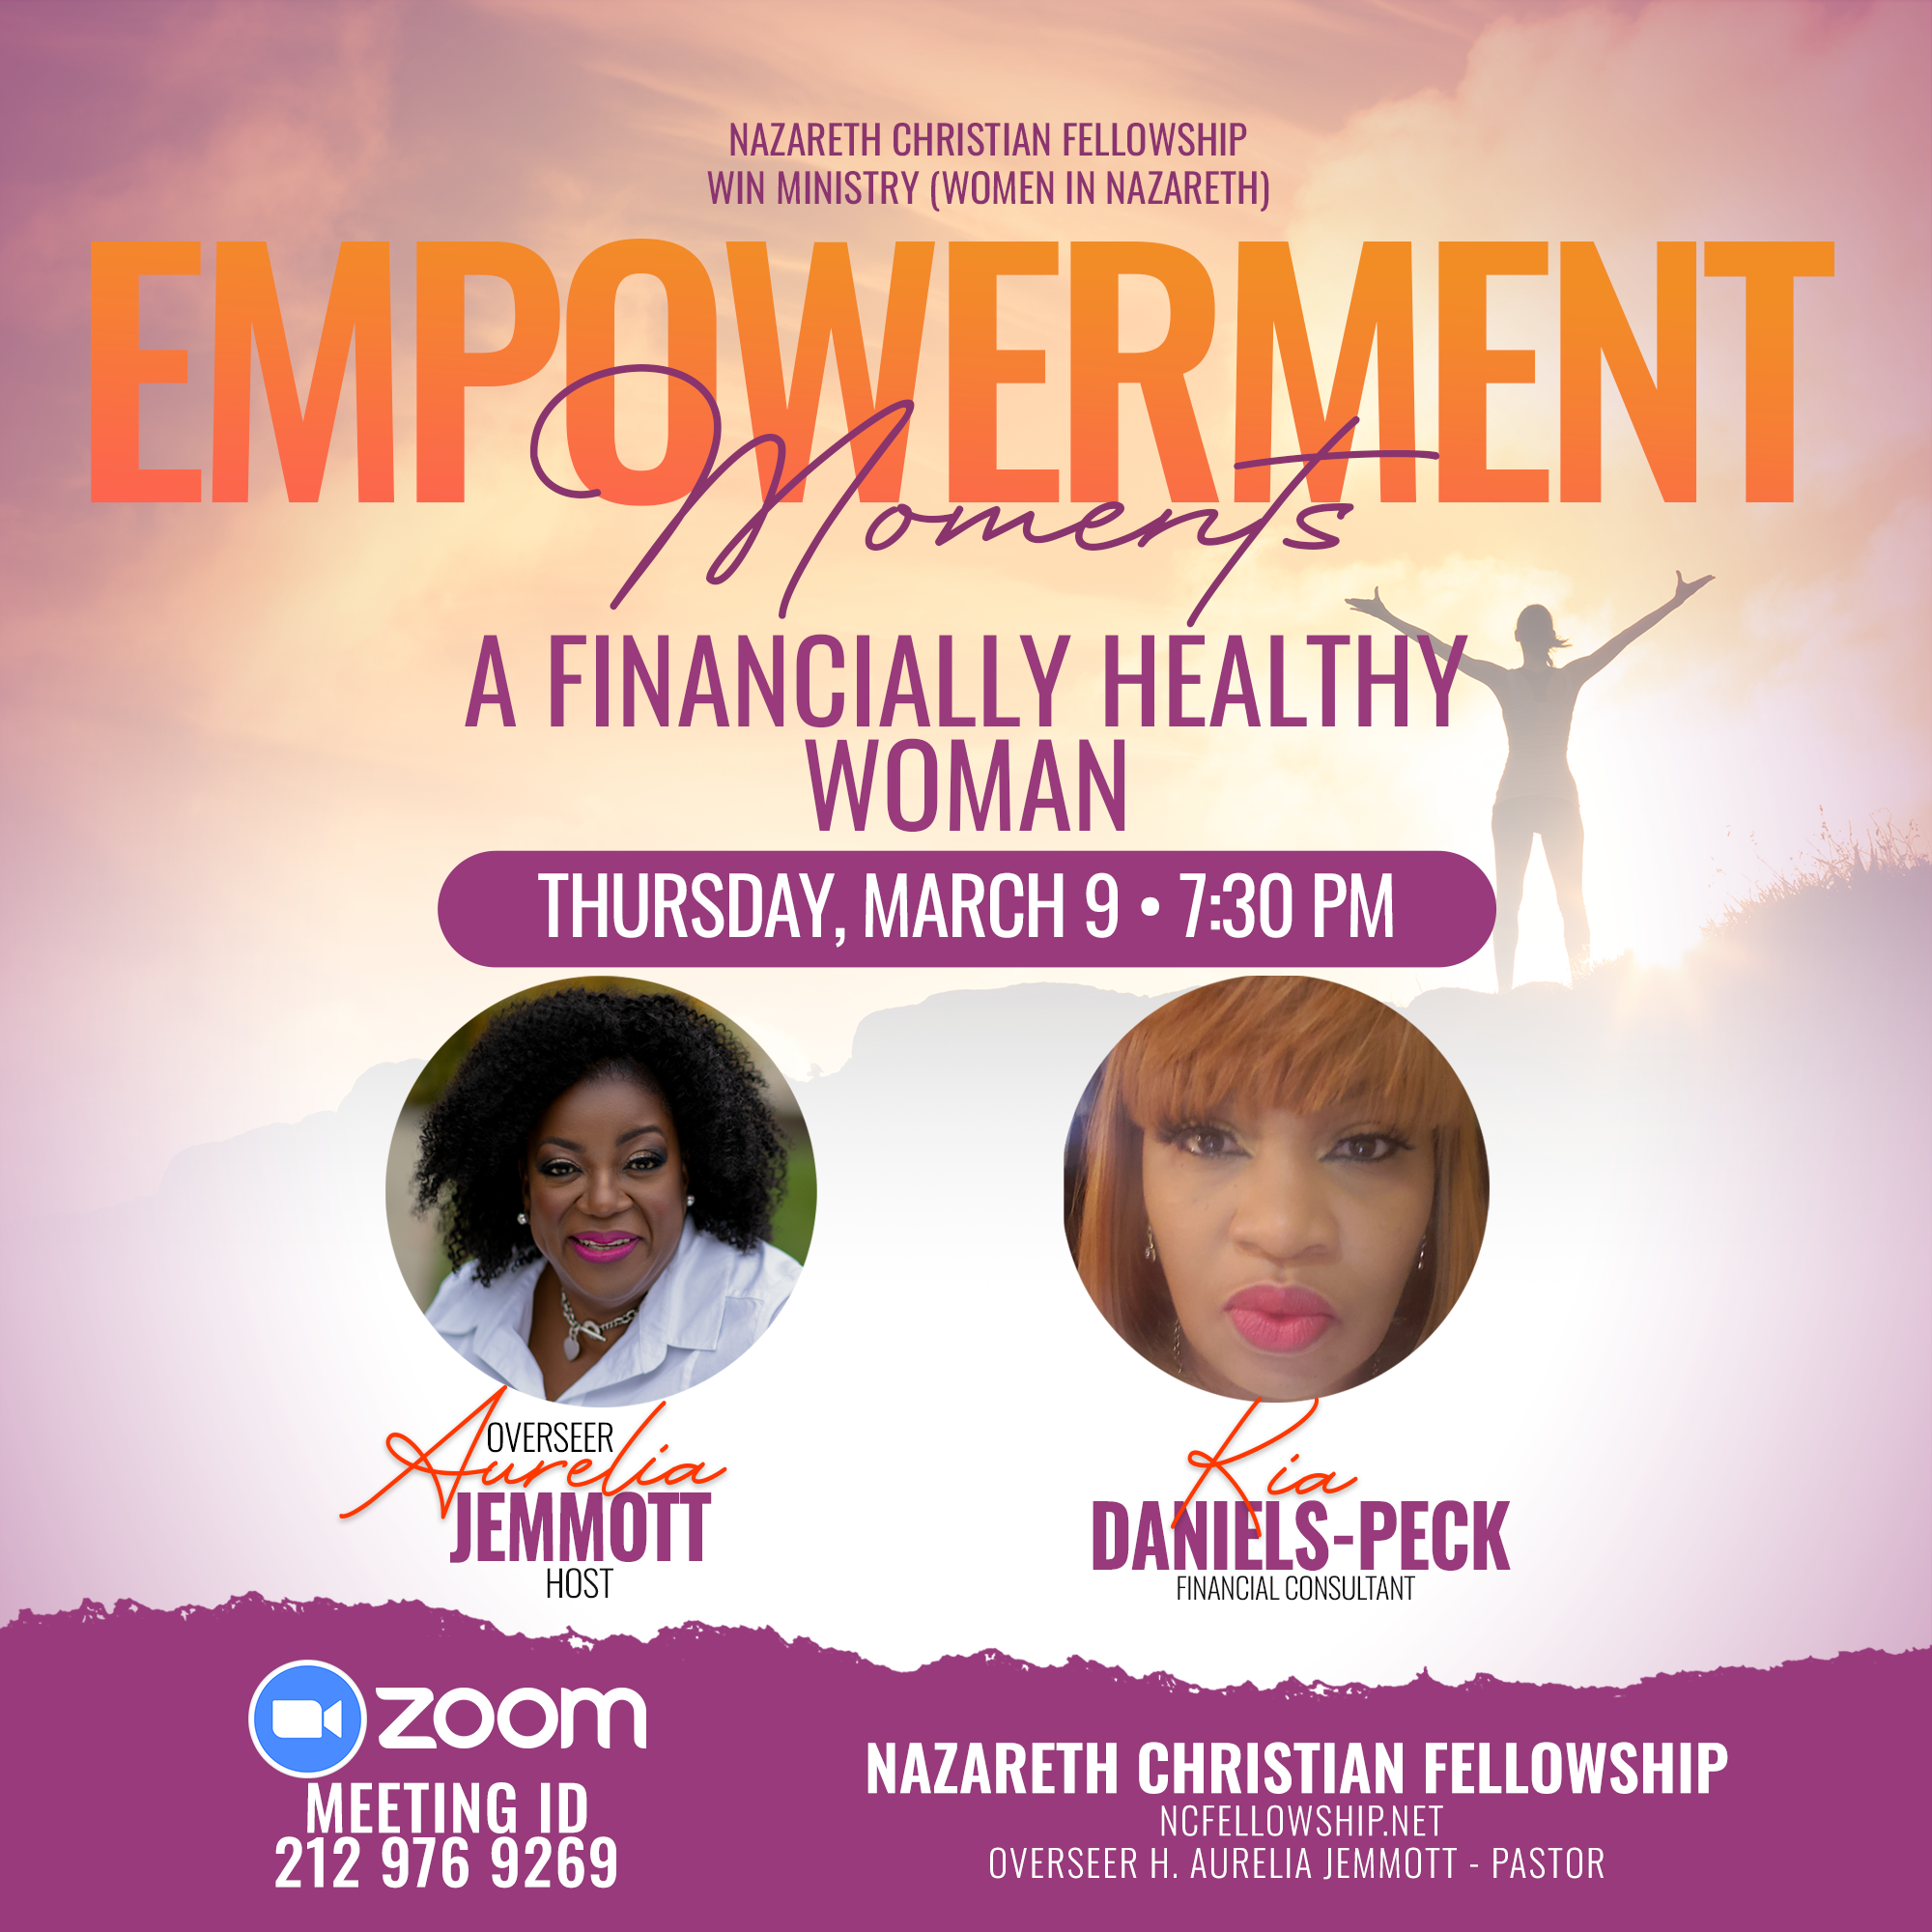 WIN Empowerment Moments Peck